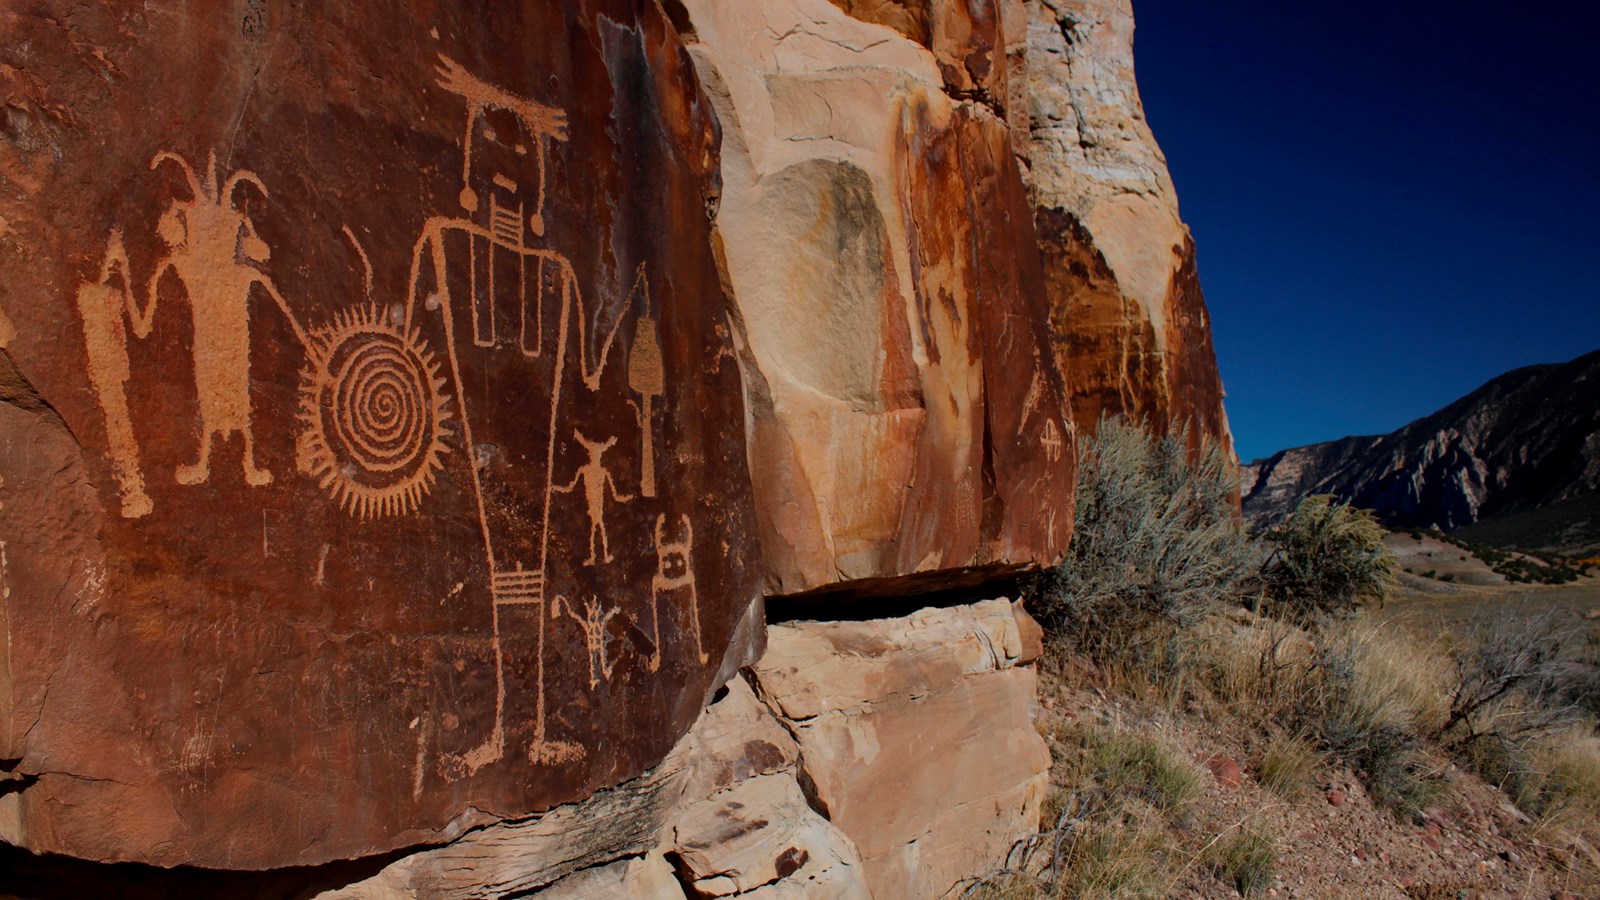 A variety of figures and designs are etched into the face of an orange-brown rock.